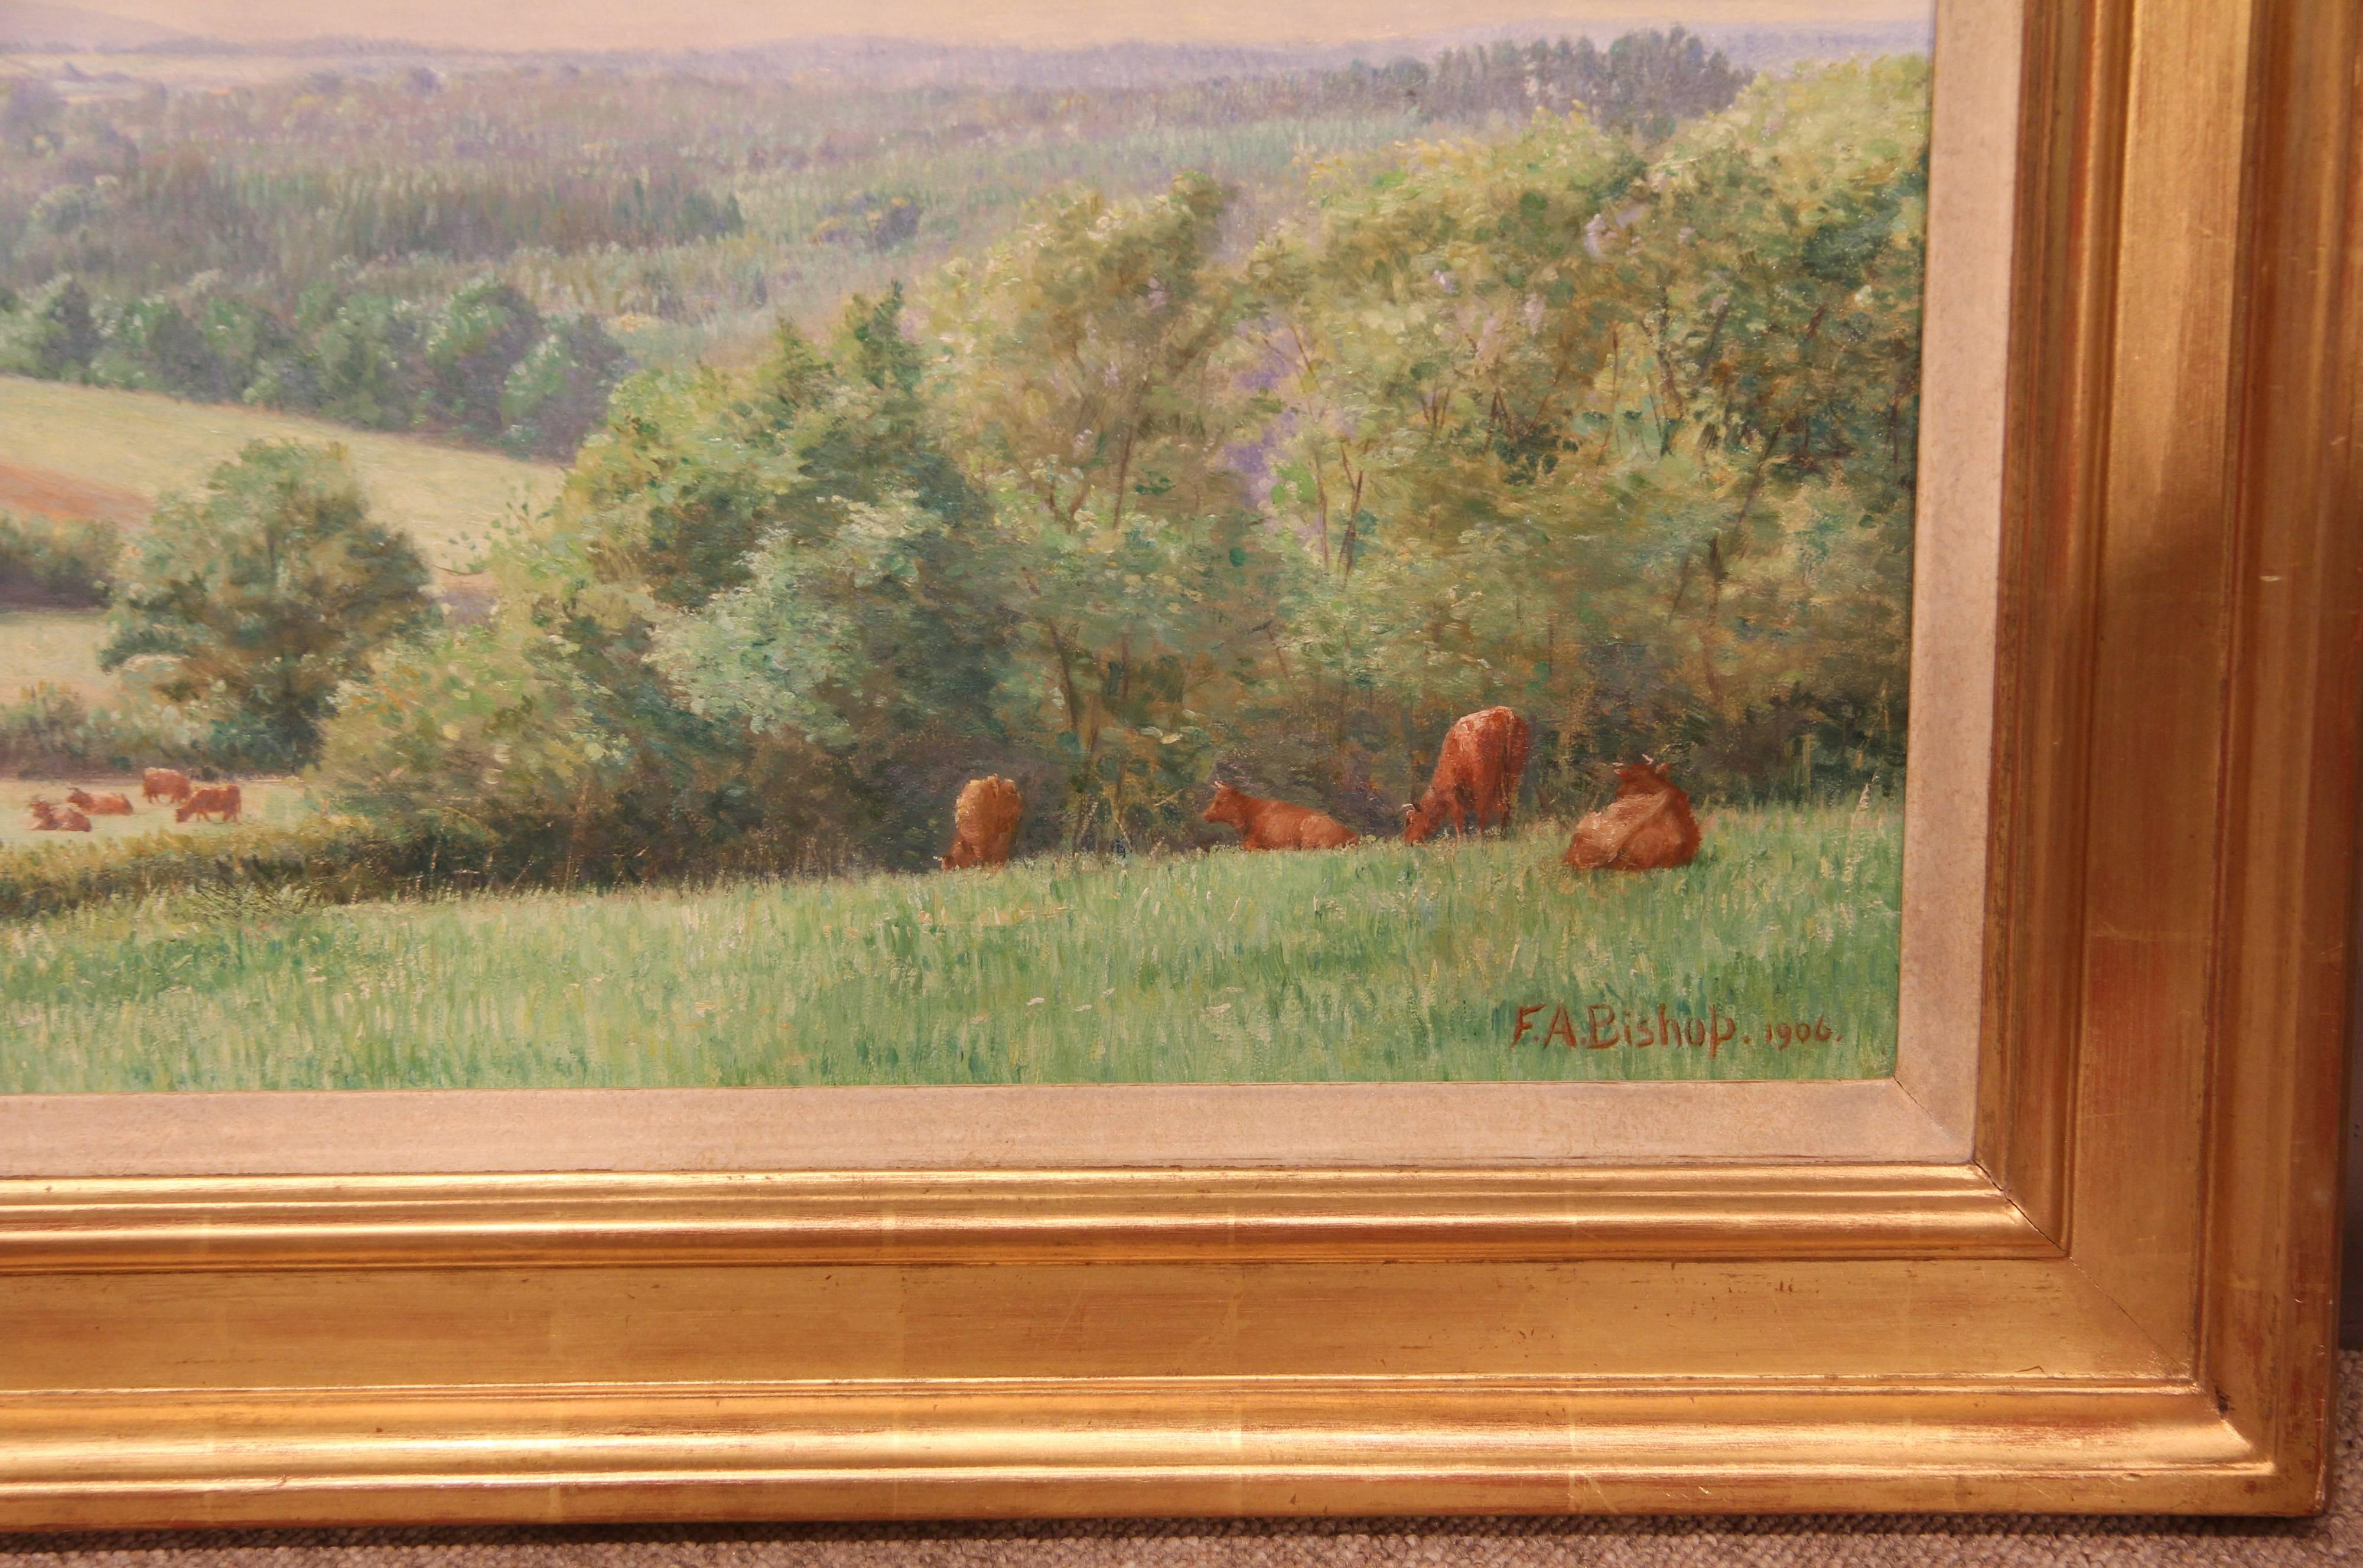 Early 20th Century Landscape Oil Painting by Frederick A. Bishop, Signed 1906